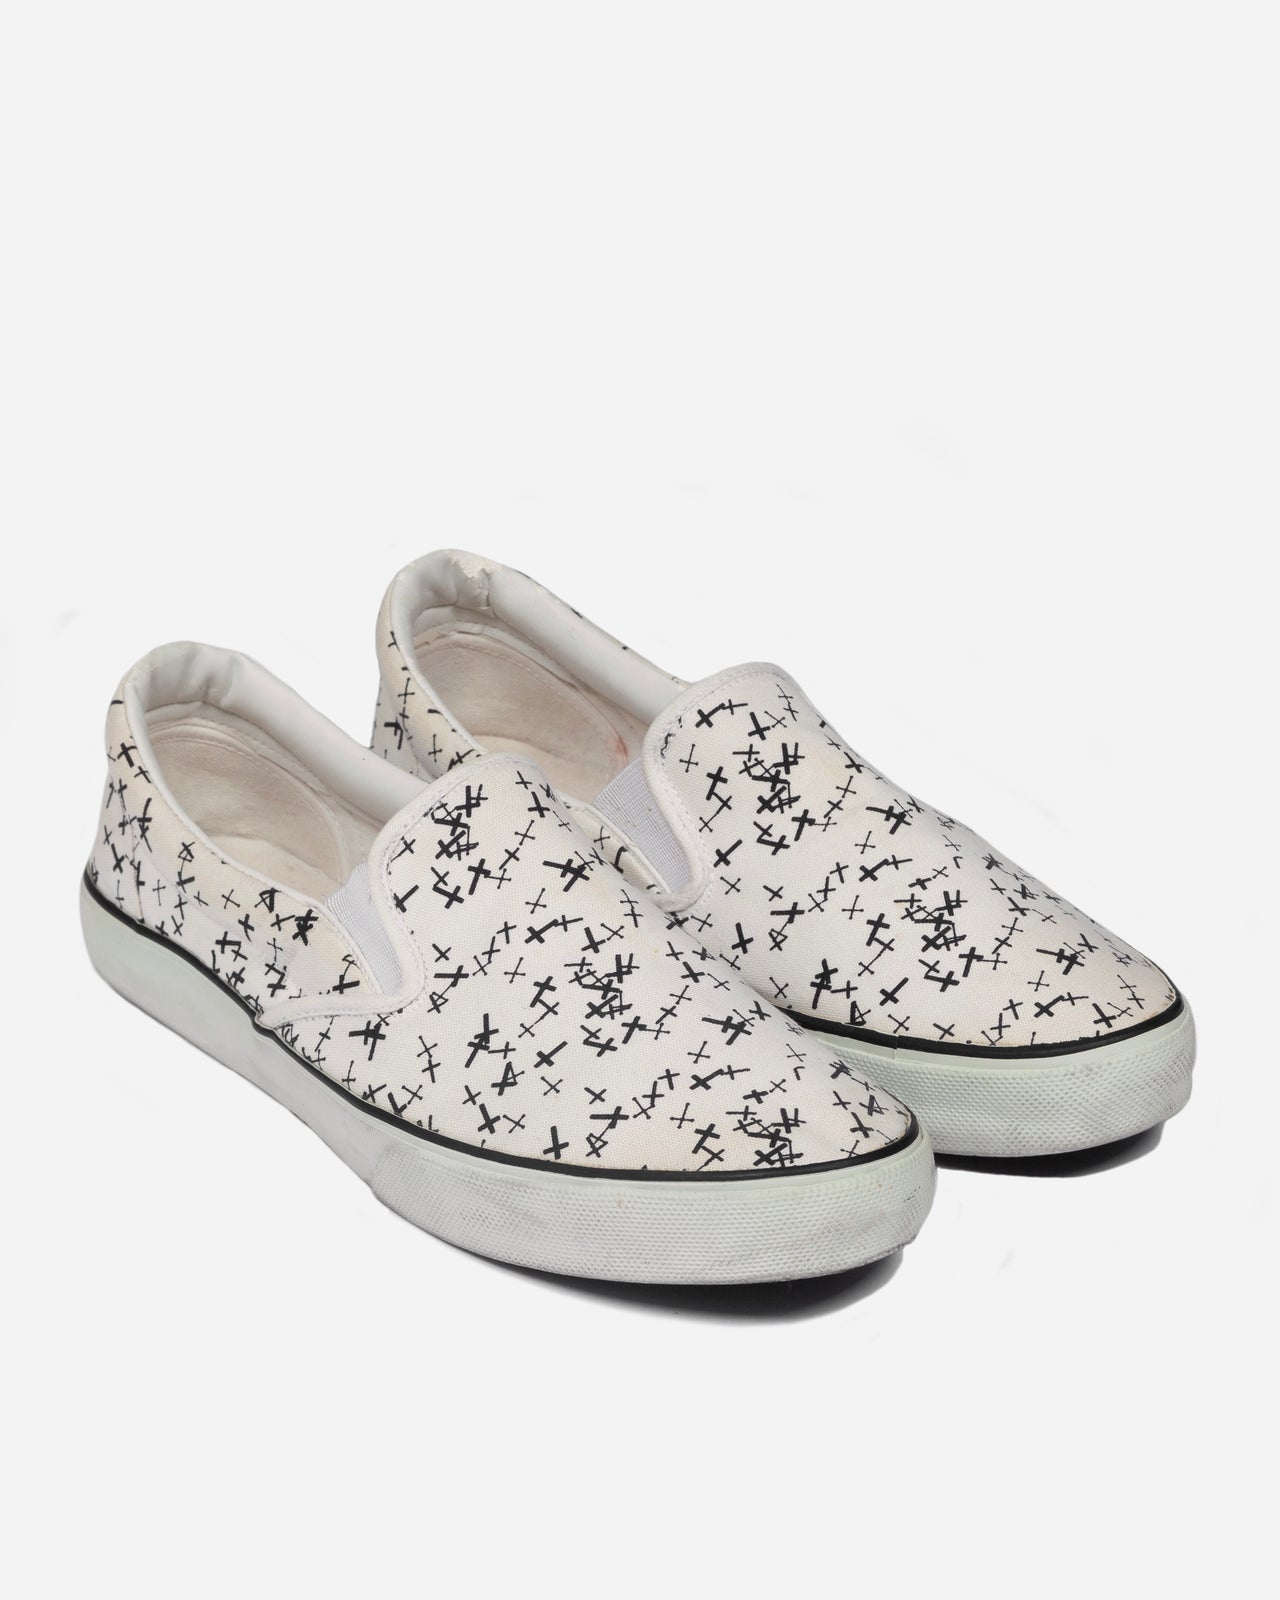 Undercover Cross Print Slip-On Sneakers - AW02 “Witches Cell Division”